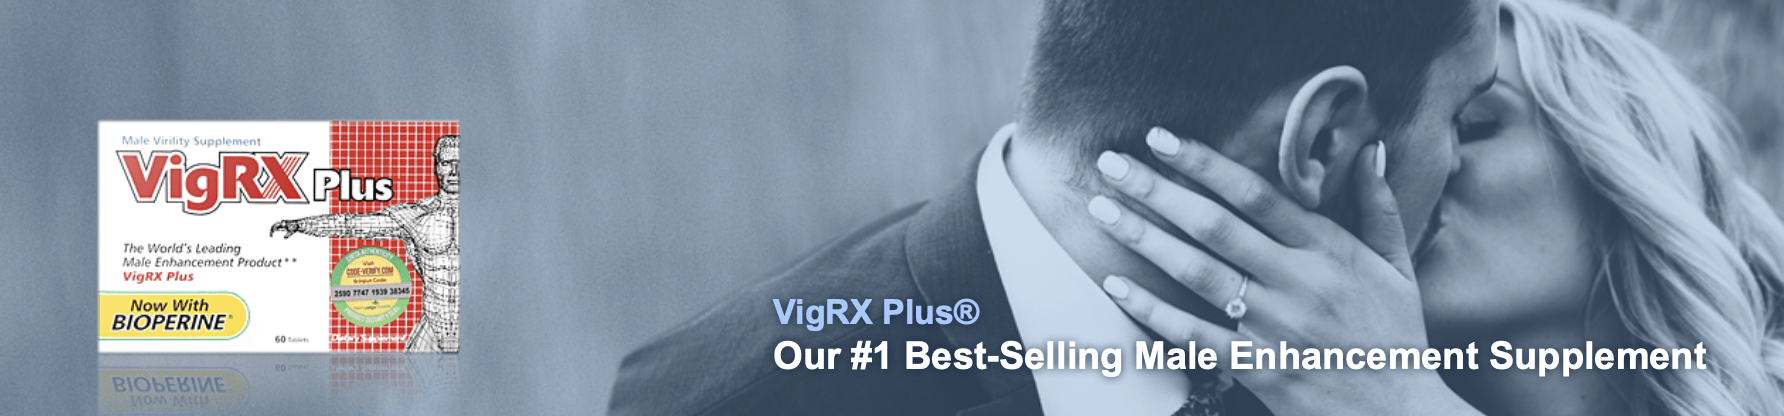 Vigrx Plus results and benefits review